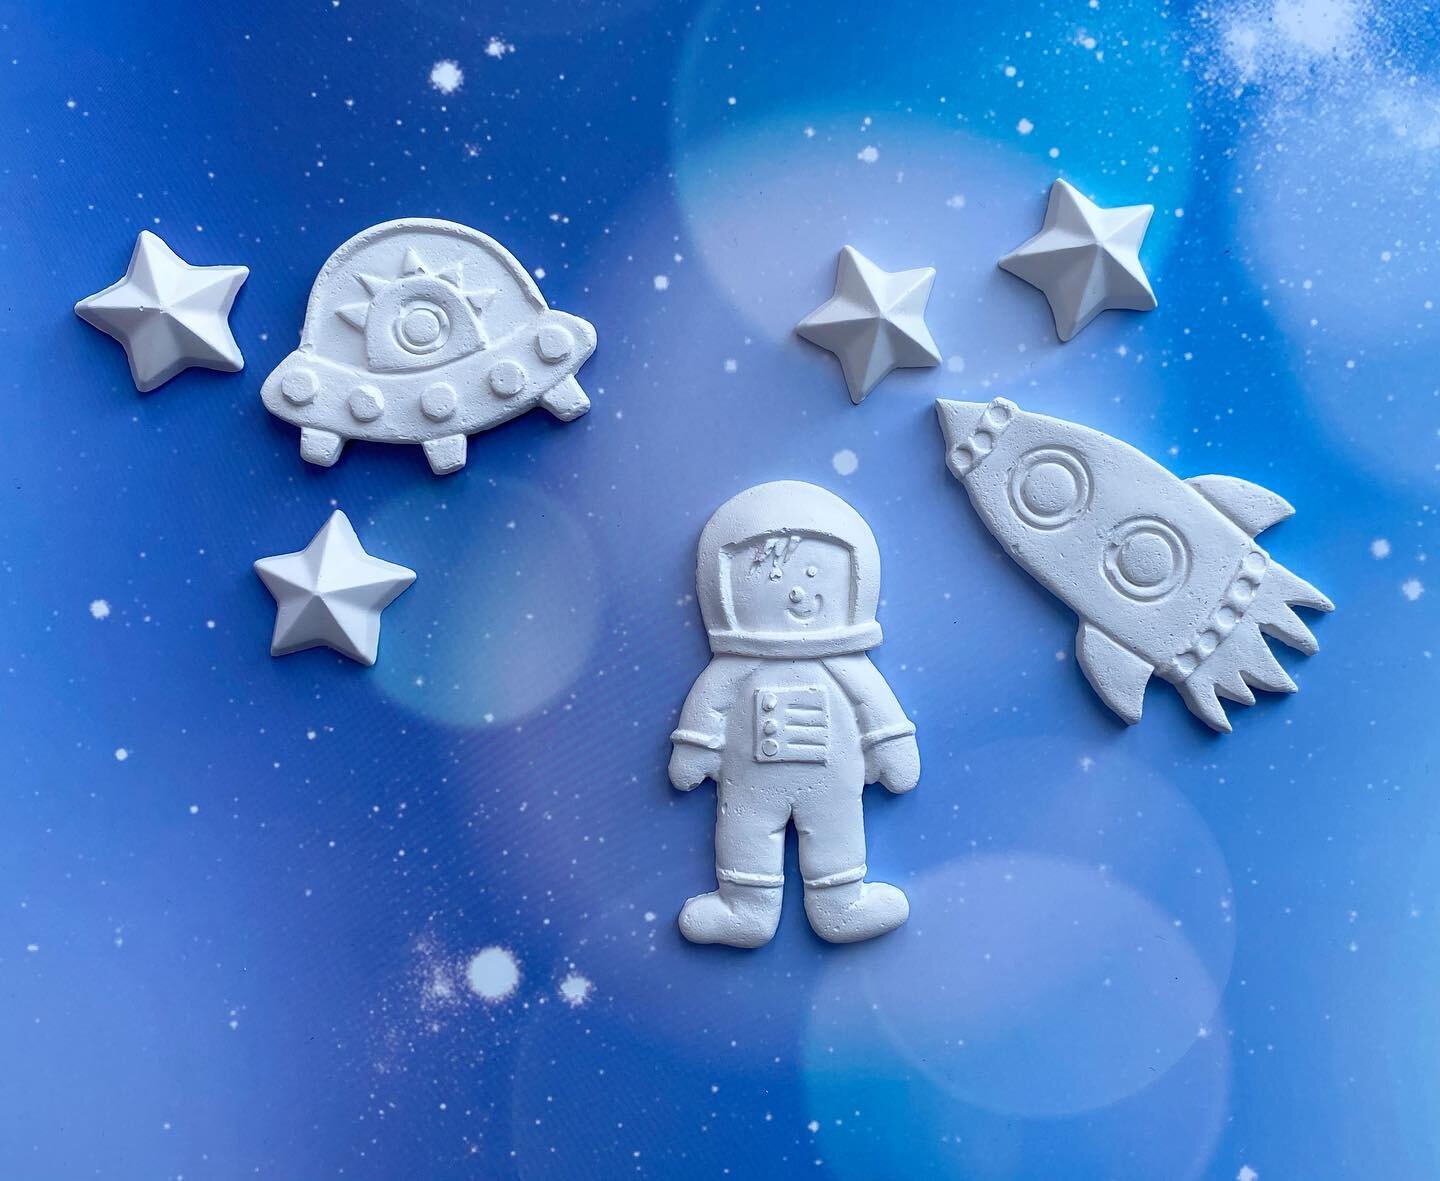 ONE SMALL STEP FOR MAN... lots of happy children to receive the NEW space themed Boredom Box.

**photographed is contents of small box**

🚀 

#space #spacetheme #spacethemed #intergalactic #galaxy #stars #spaceship #ufo #astronaut #astronomy #astron